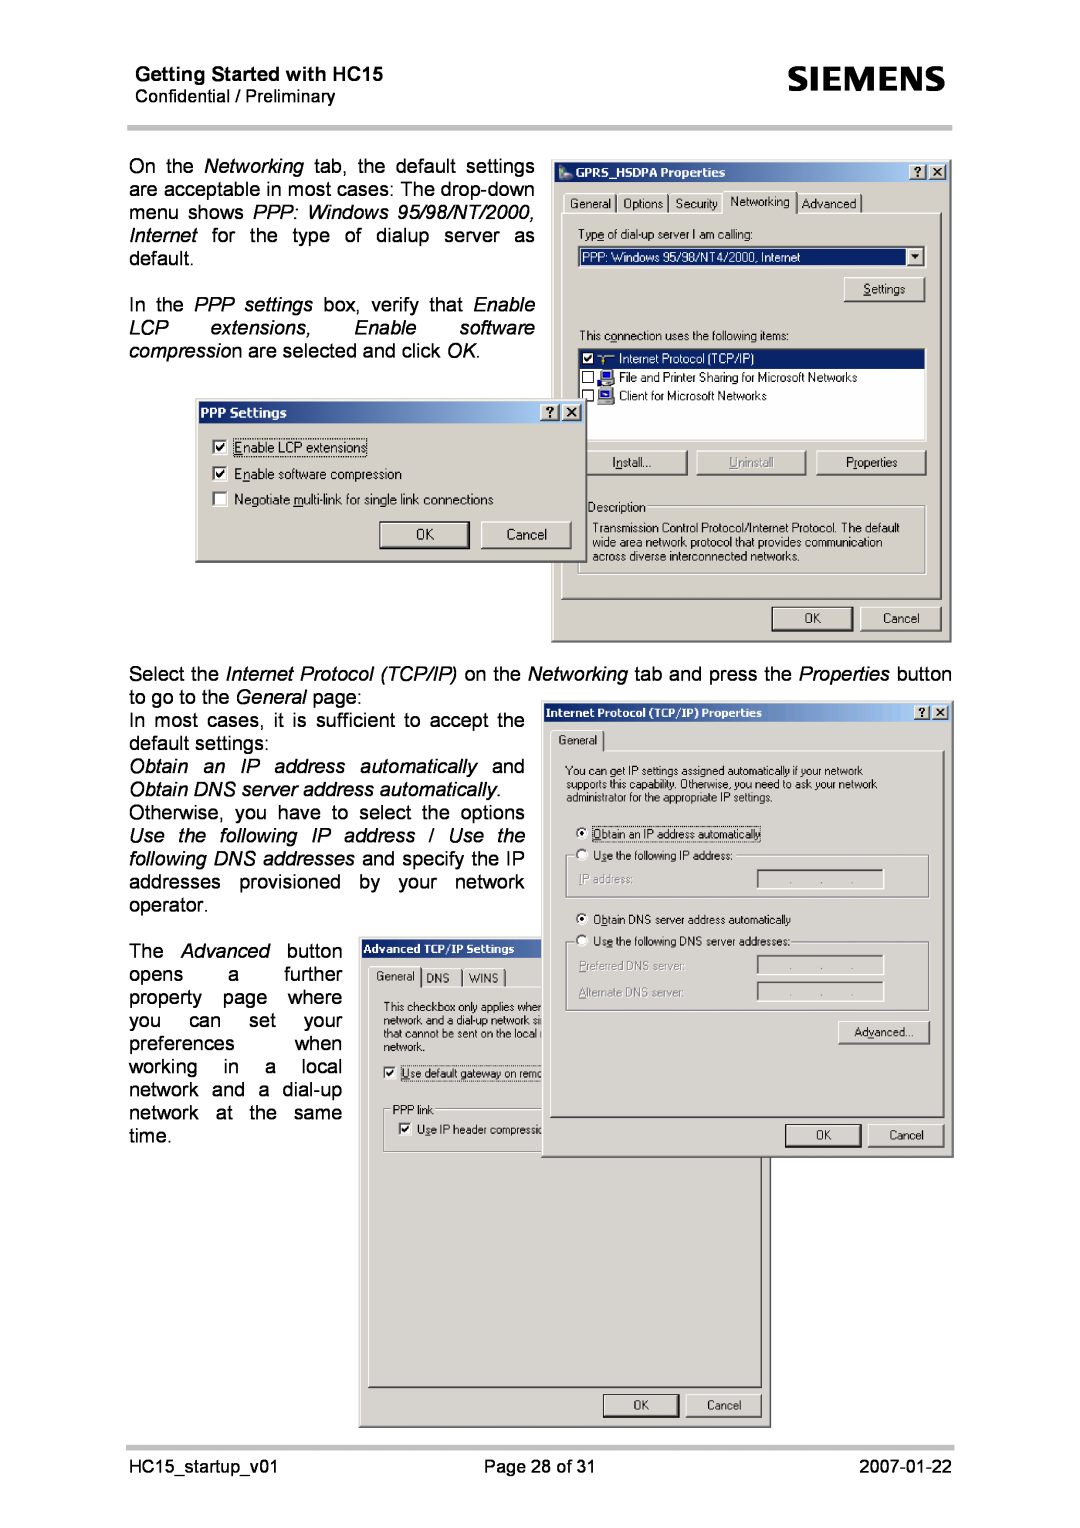 Siemens manual Getting Started with HC15, In most cases, it is sufficient to accept the default settings 